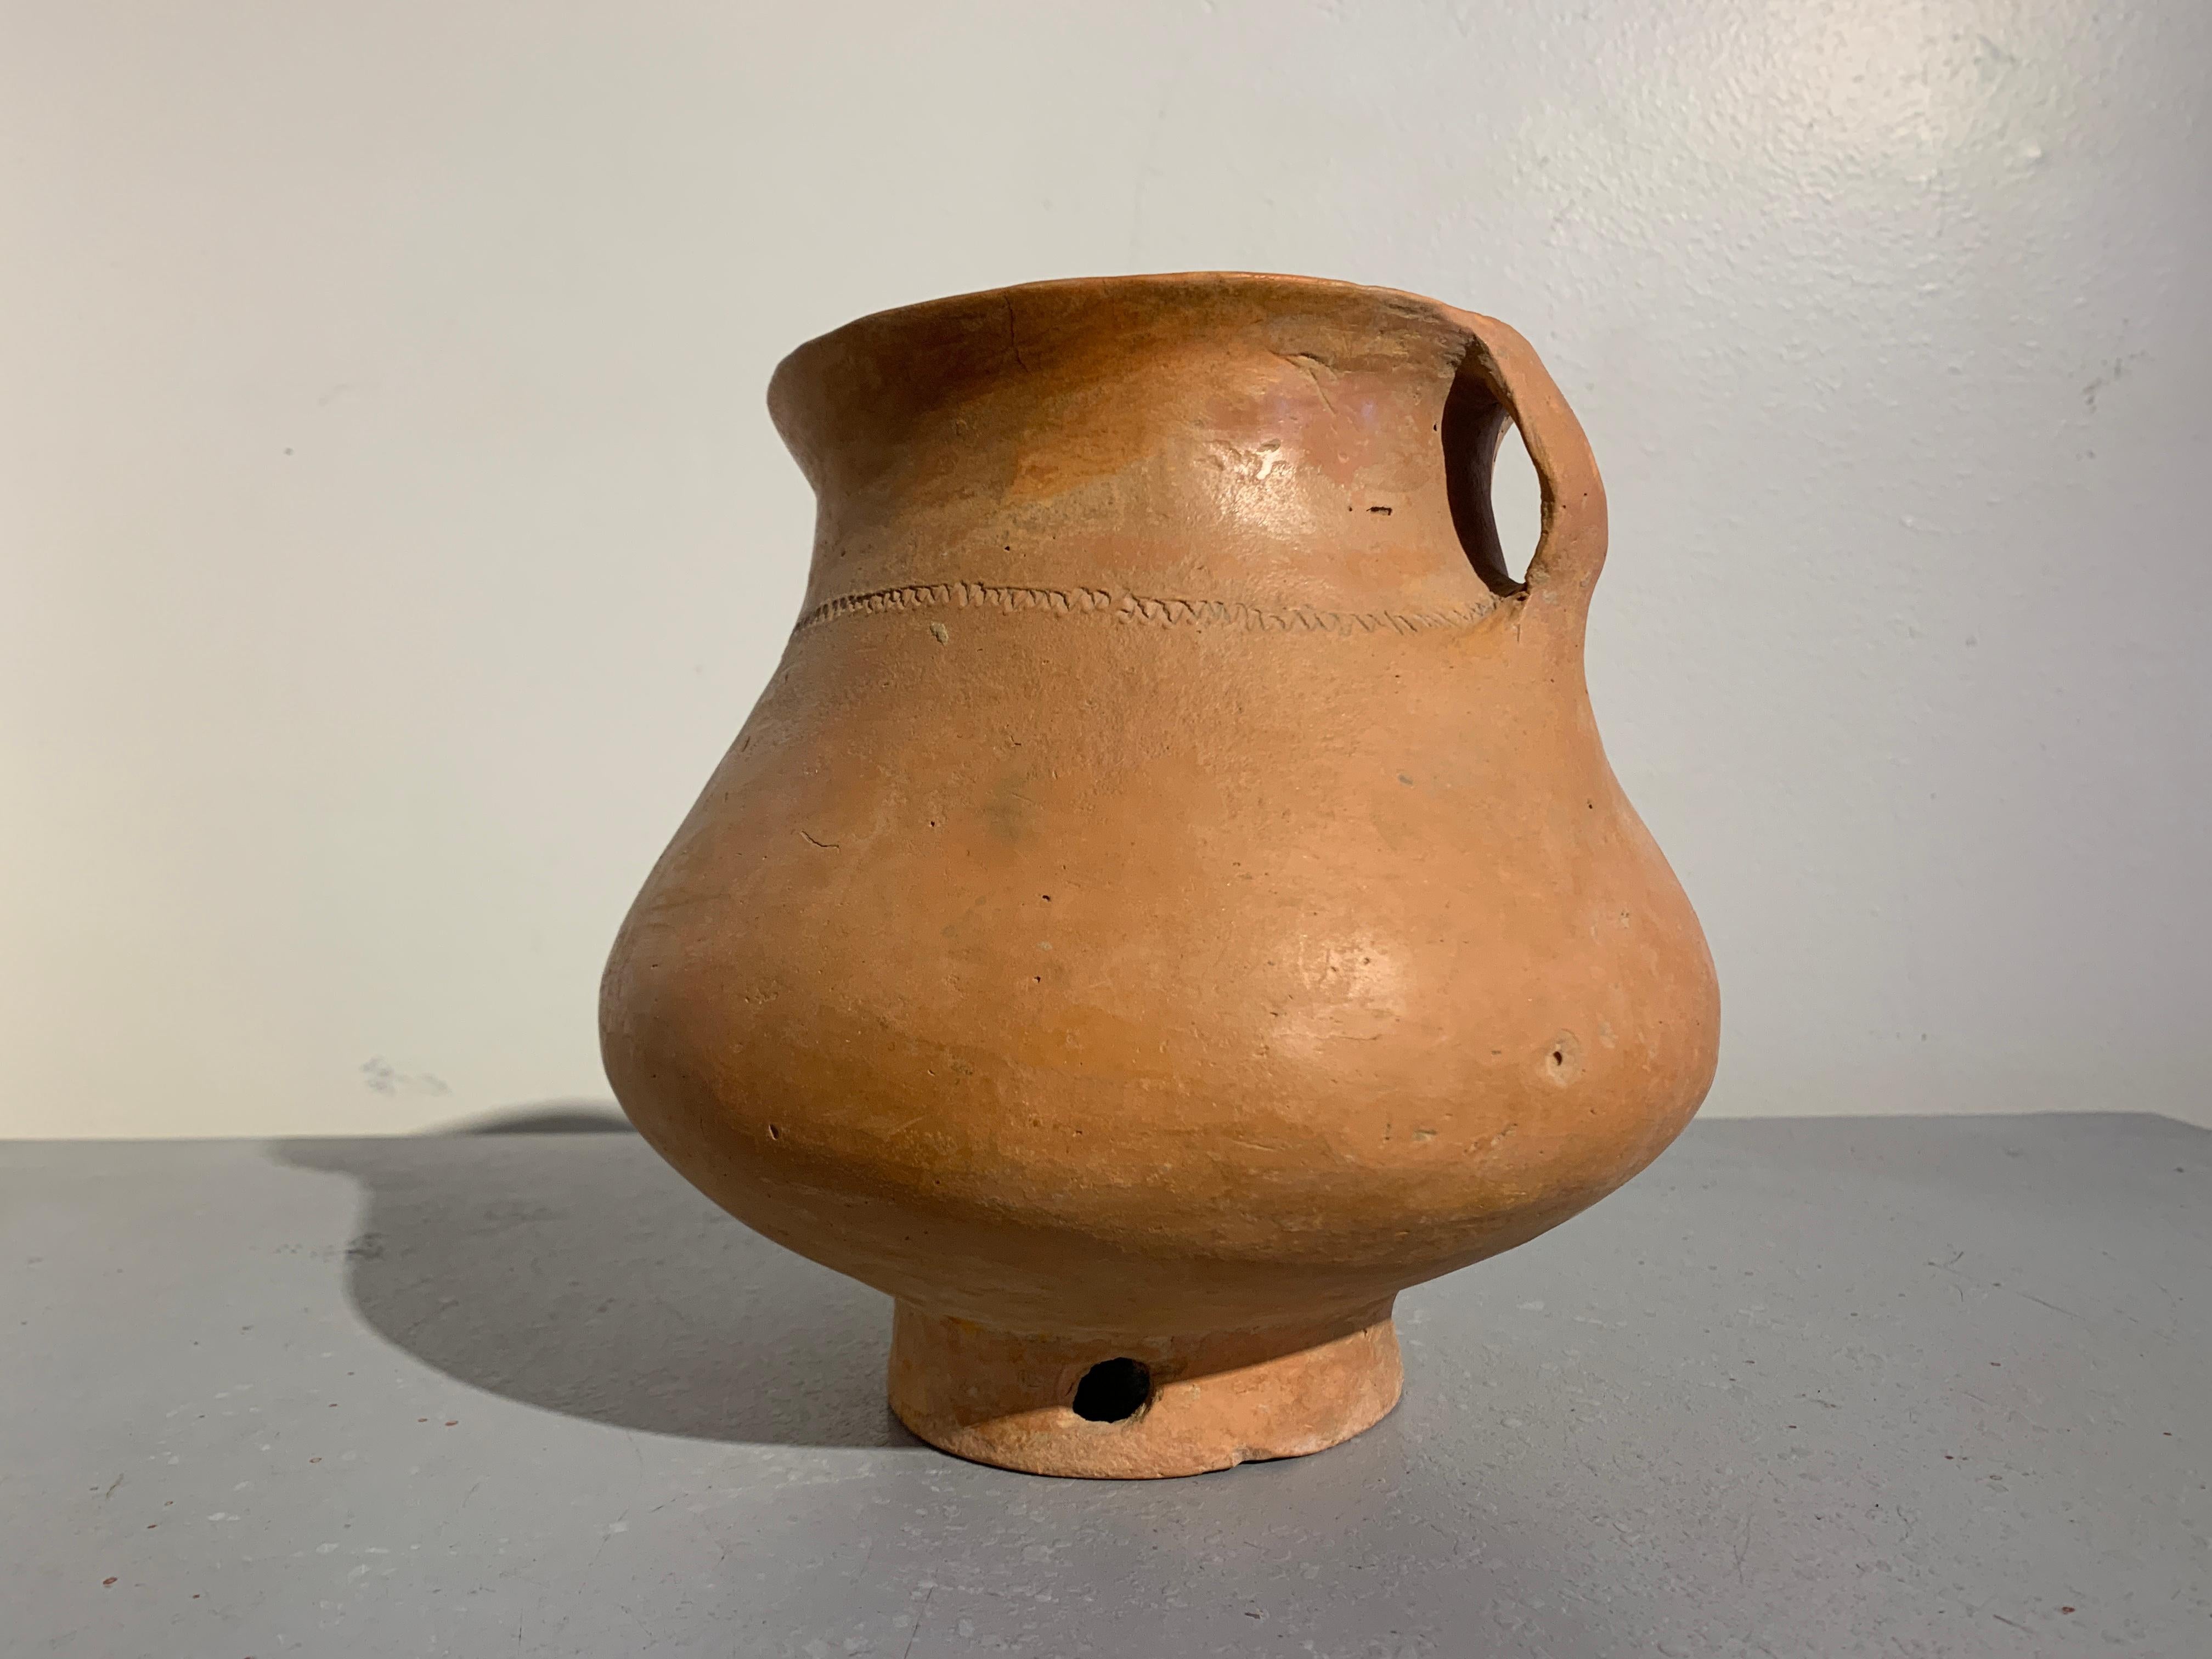 Fired Chinese Neolithic Qijia Culture Red Pottery Vessel, 2200 BC - 1600 BC, China For Sale